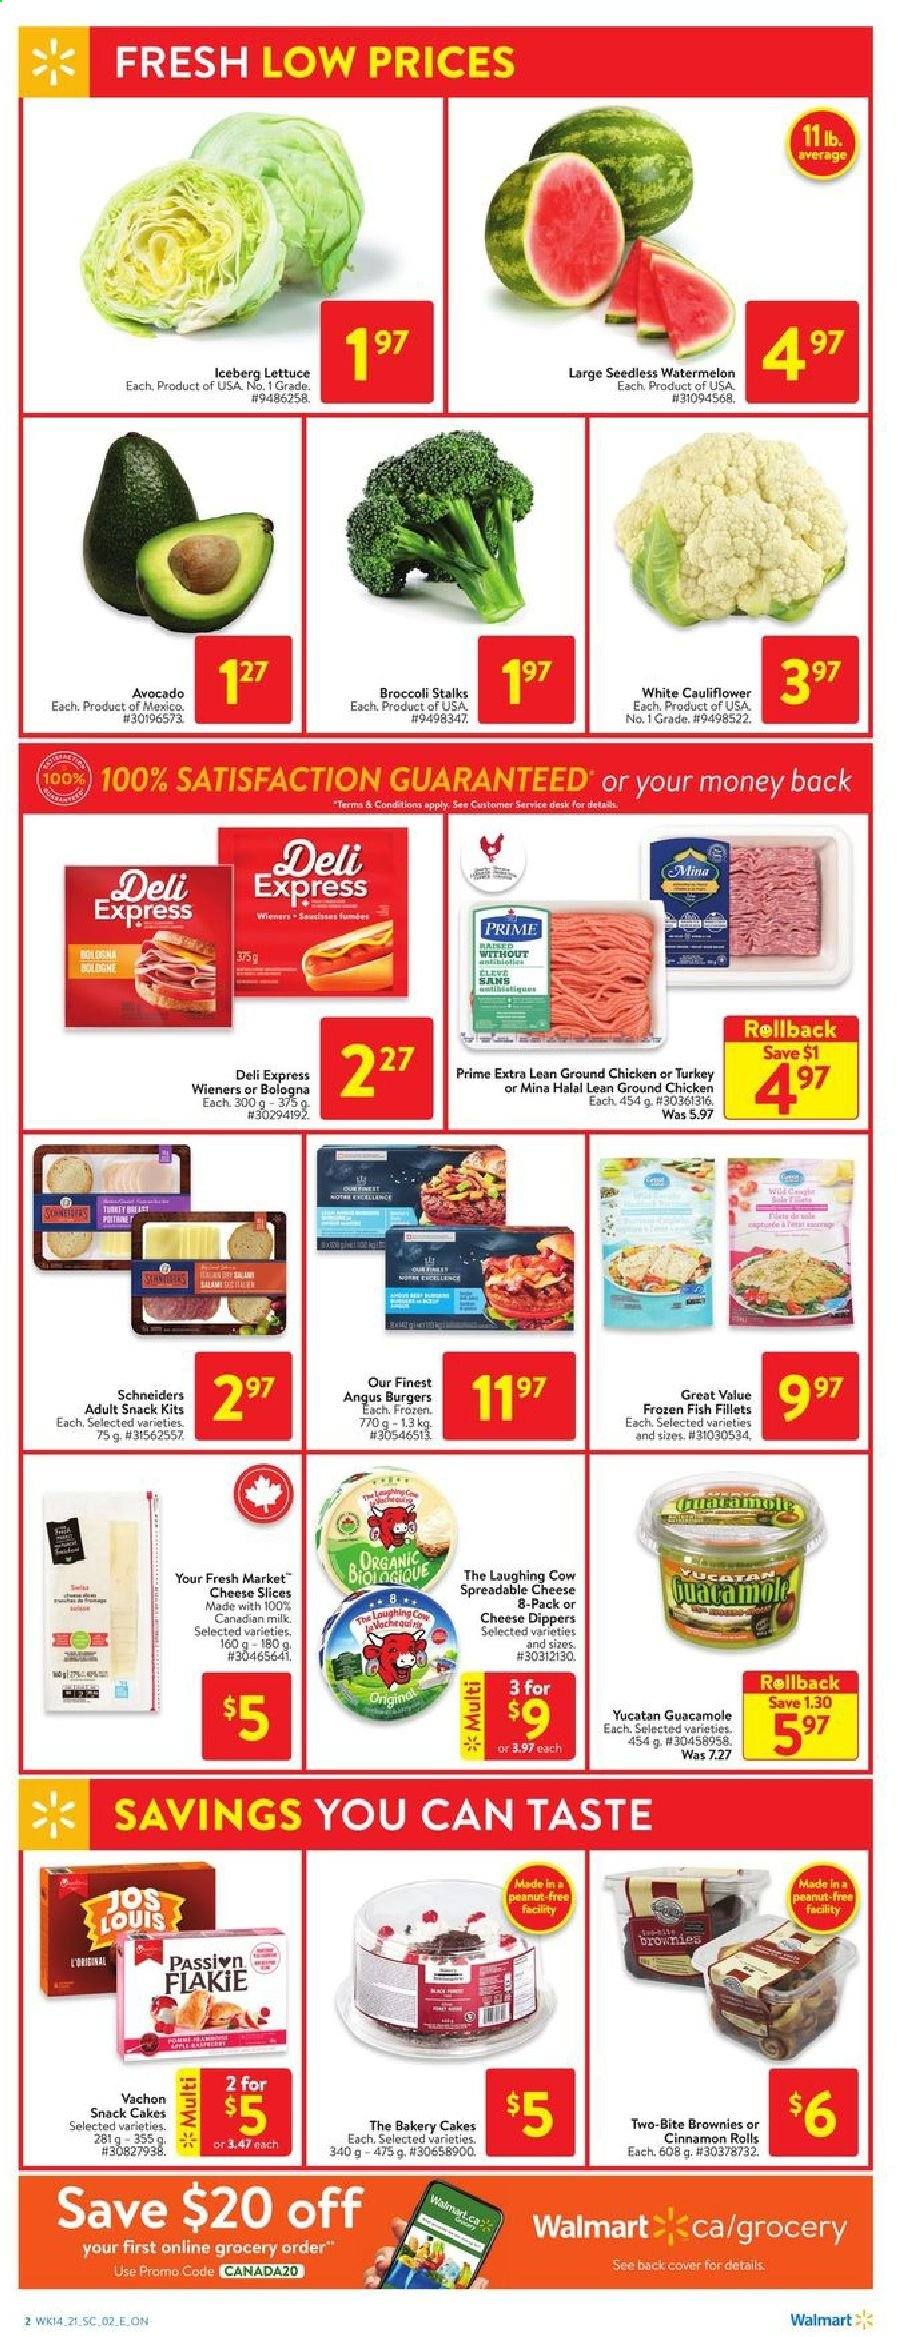 thumbnail - Walmart Flyer - April 29, 2021 - May 05, 2021 - Sales products - cake, cinnamon roll, brownies, broccoli, cauliflower, lettuce, watermelon, fish fillets, fish, hamburger, bologna sausage, guacamole, sliced cheese, cheese, The Laughing Cow, milk, snack, ground chicken, chicken. Page 2.